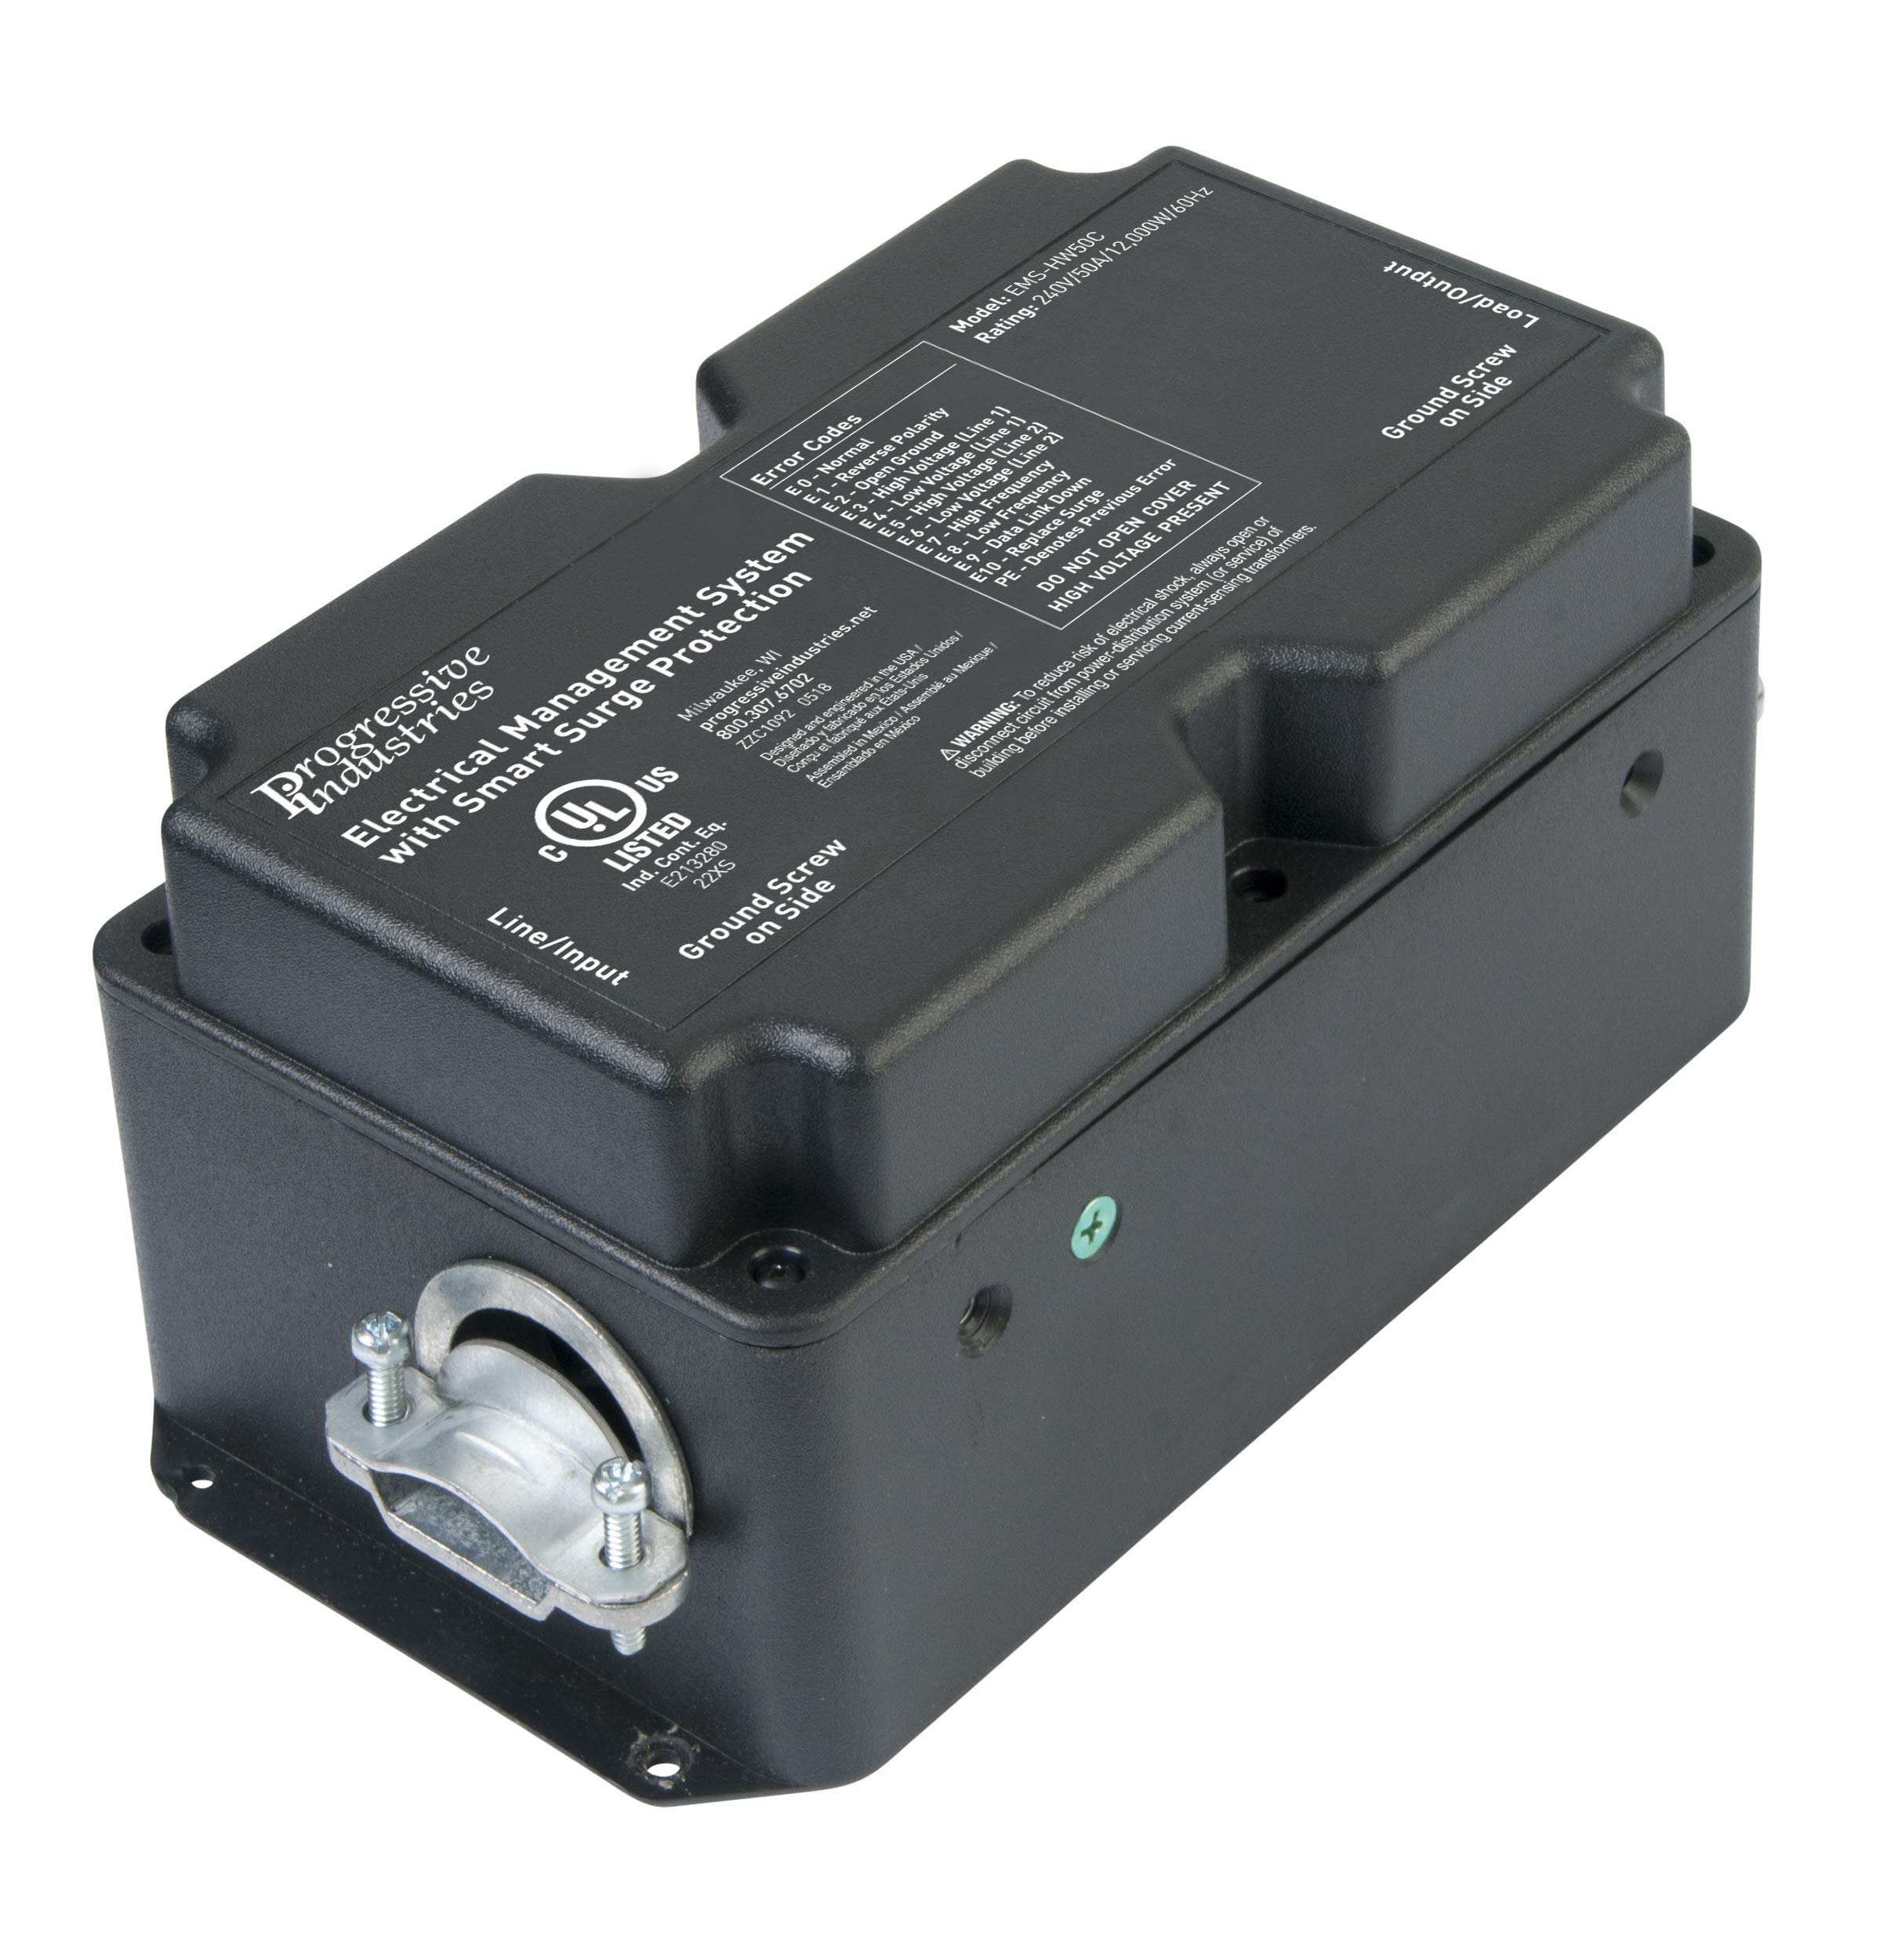 Progressive Industries RV Surge Protector, Available in 30/50 Amp, Portable and Hardwired Options.